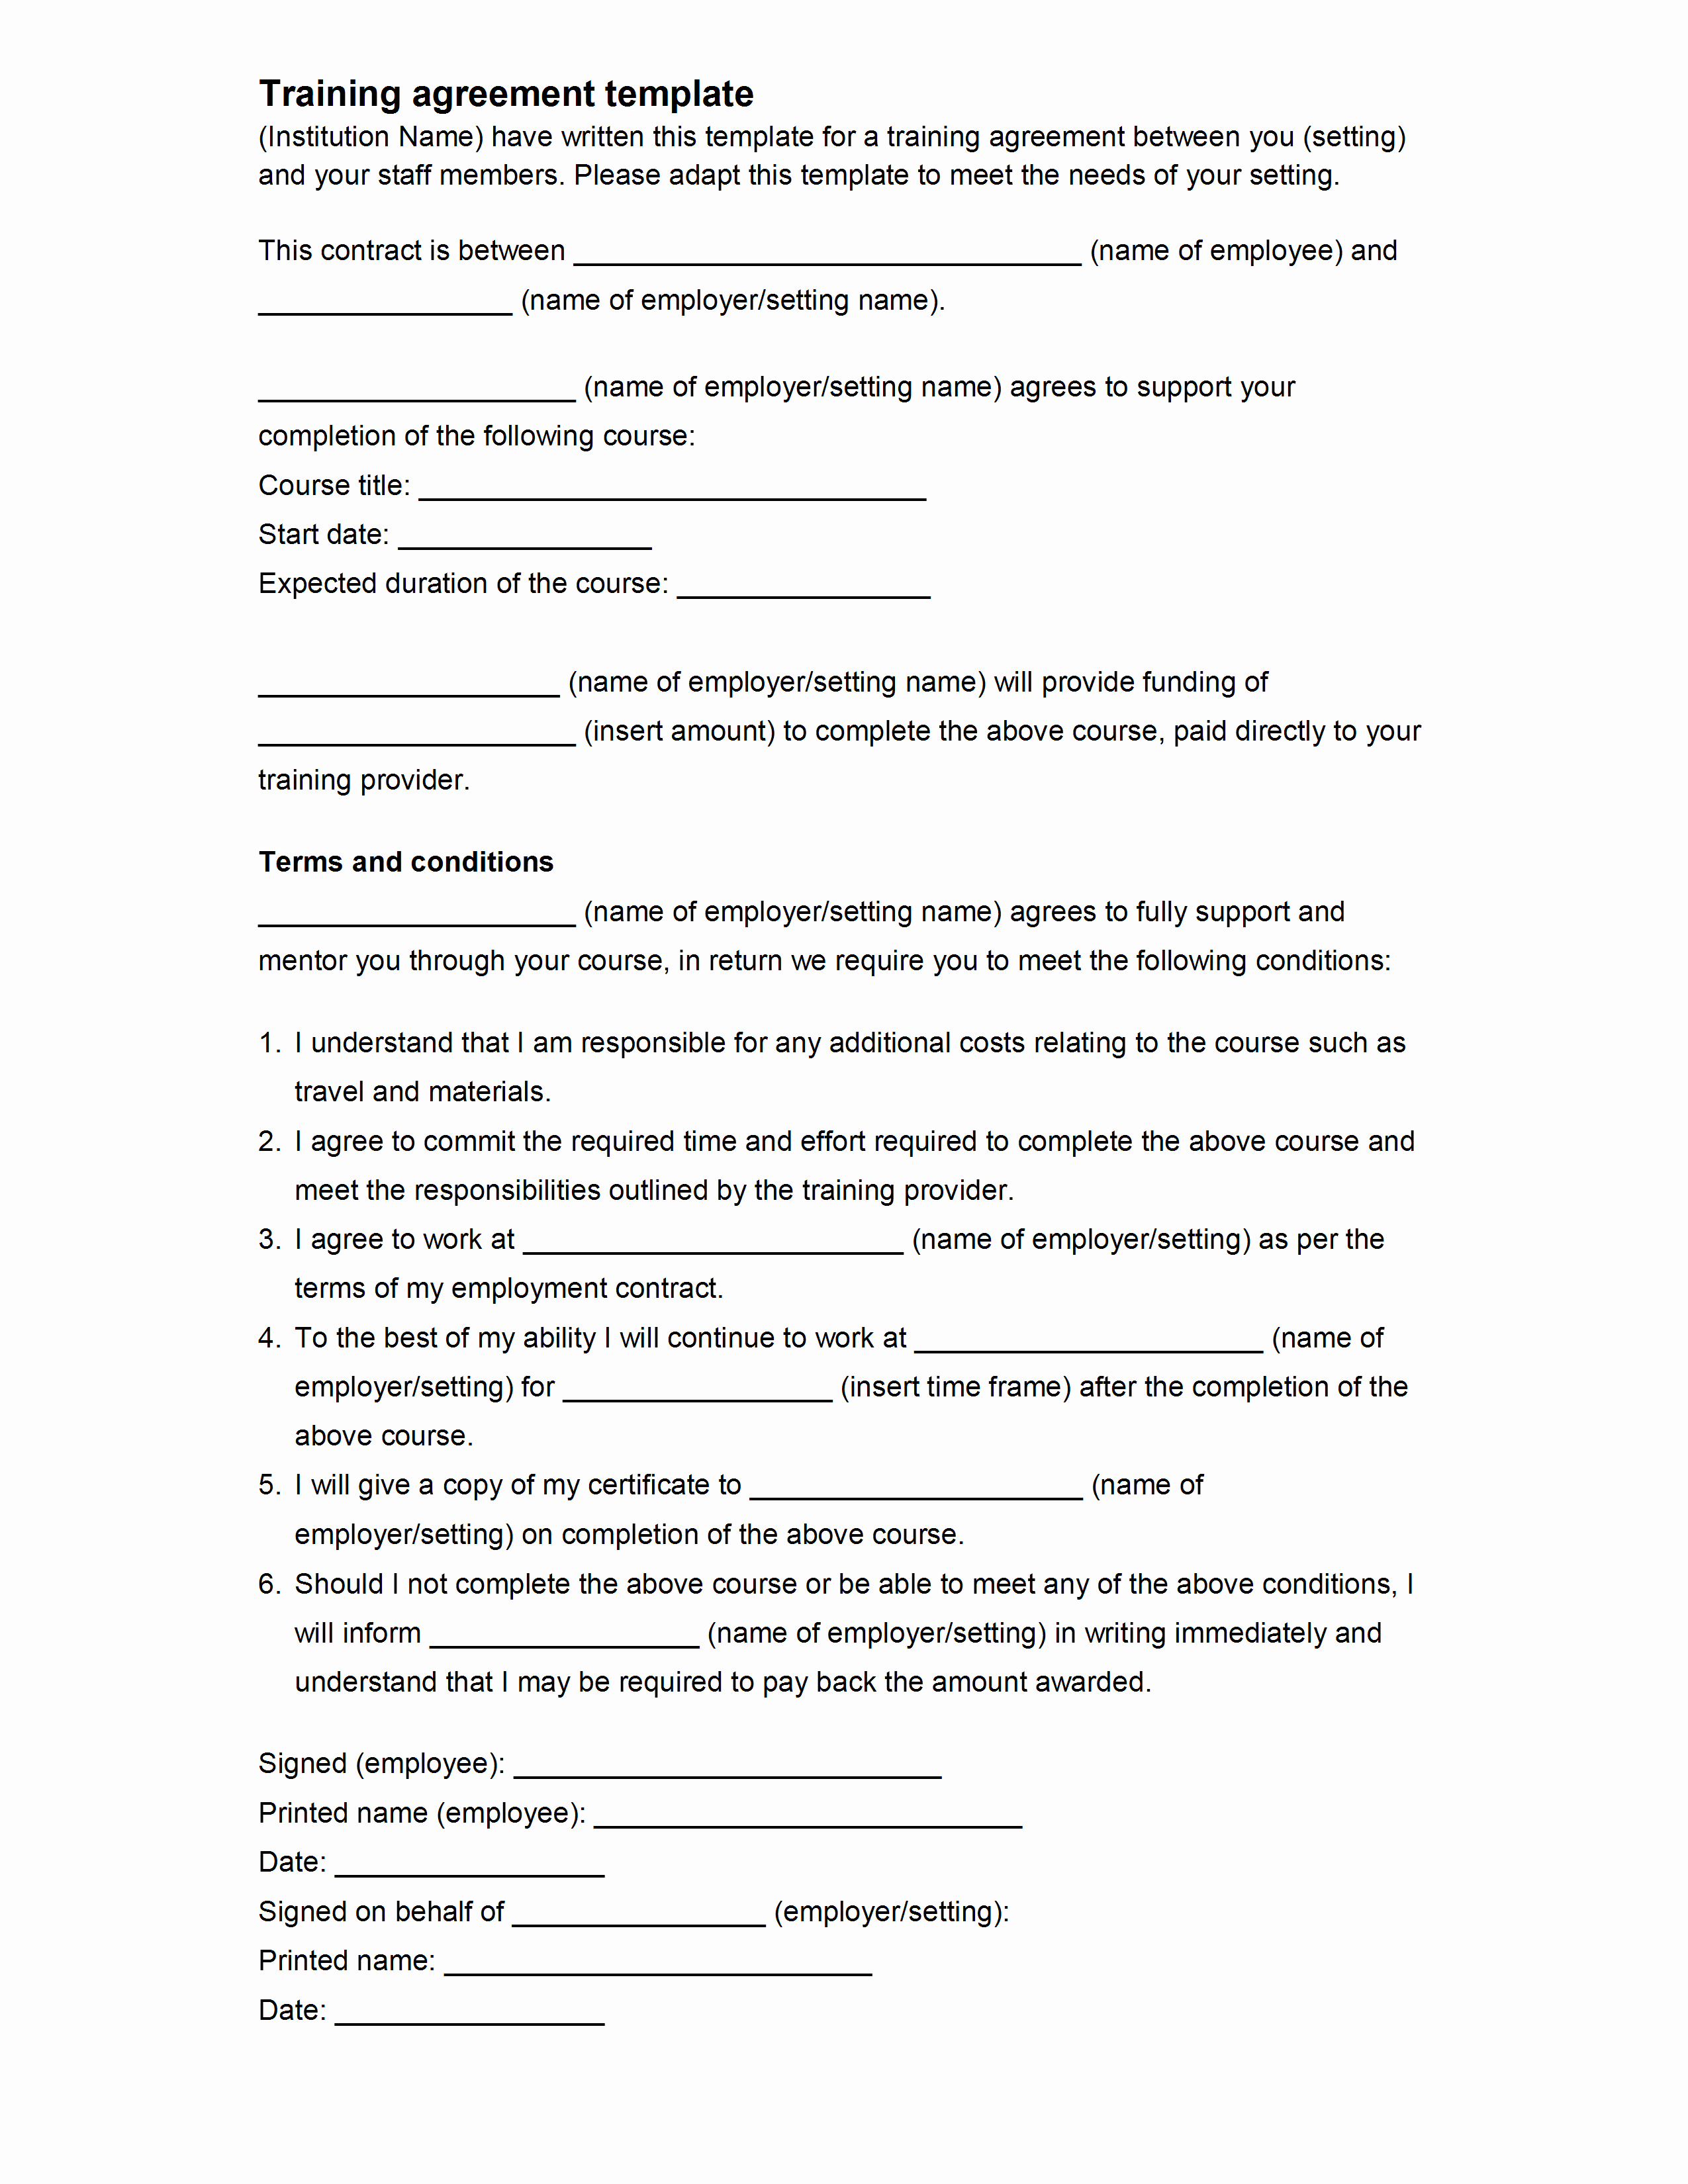 Personal Training Contract Template Fresh Employee Training Agreement Template